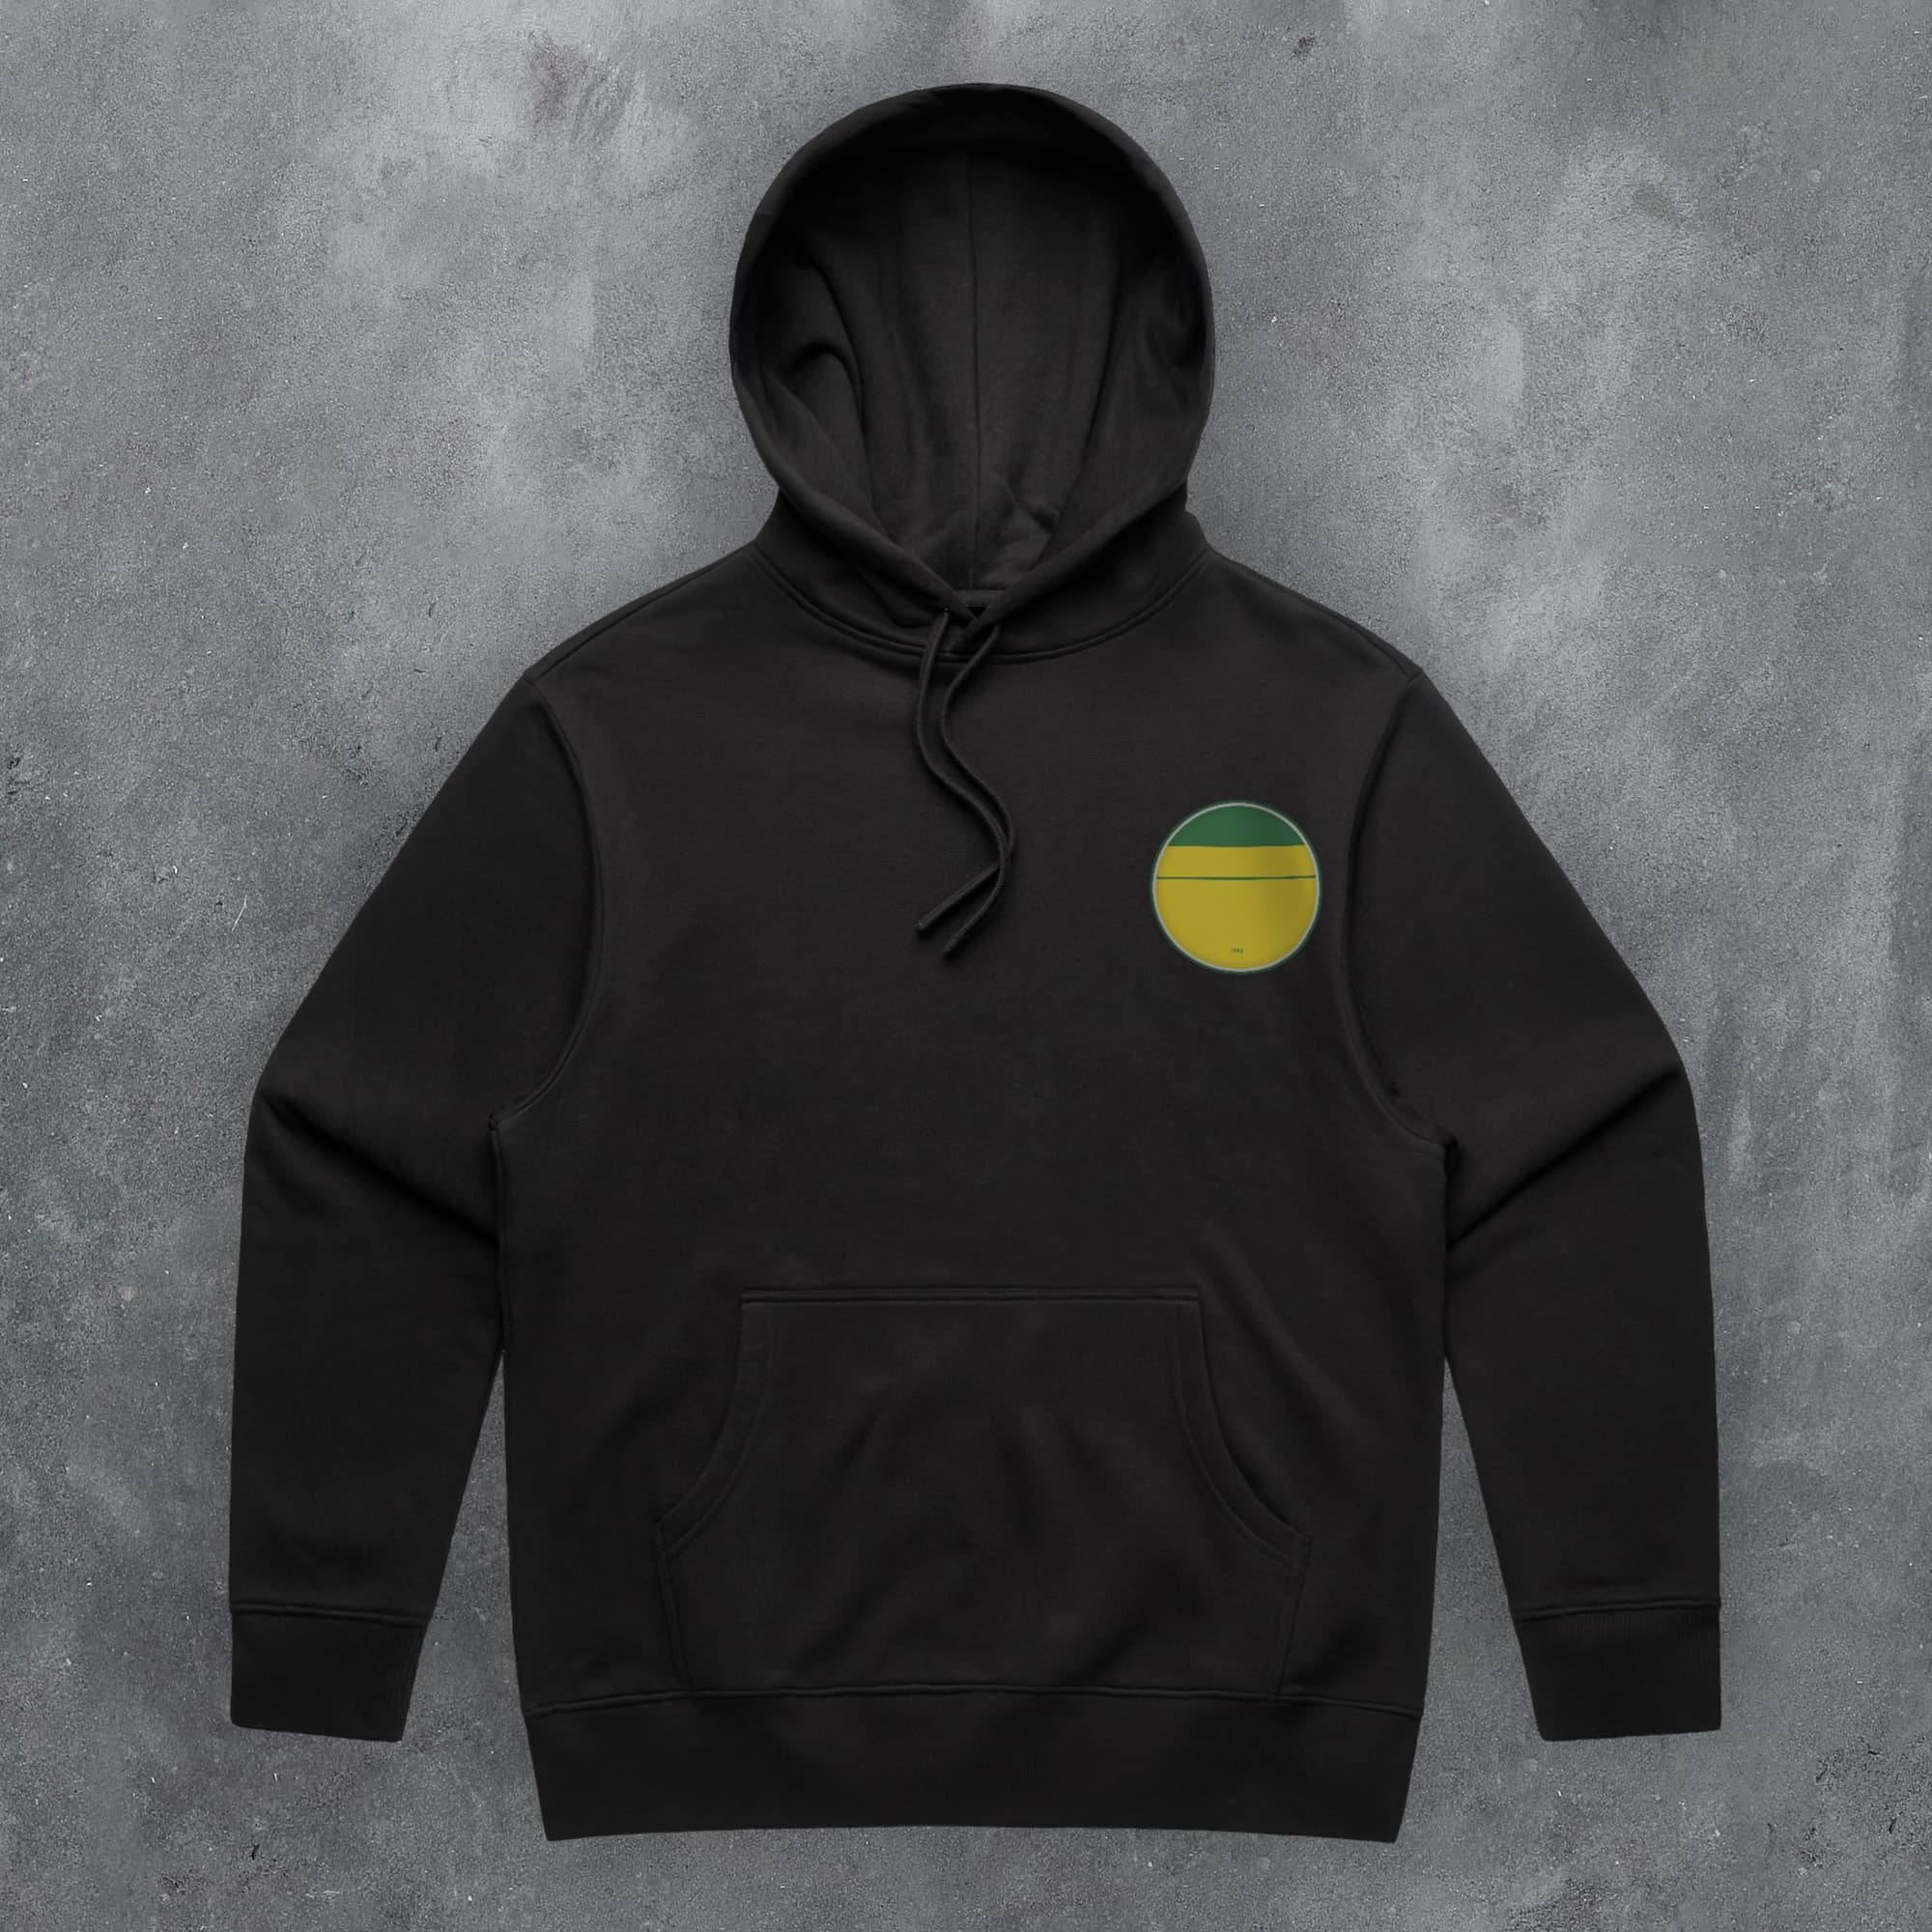 a black hoodie with a yellow circle on it